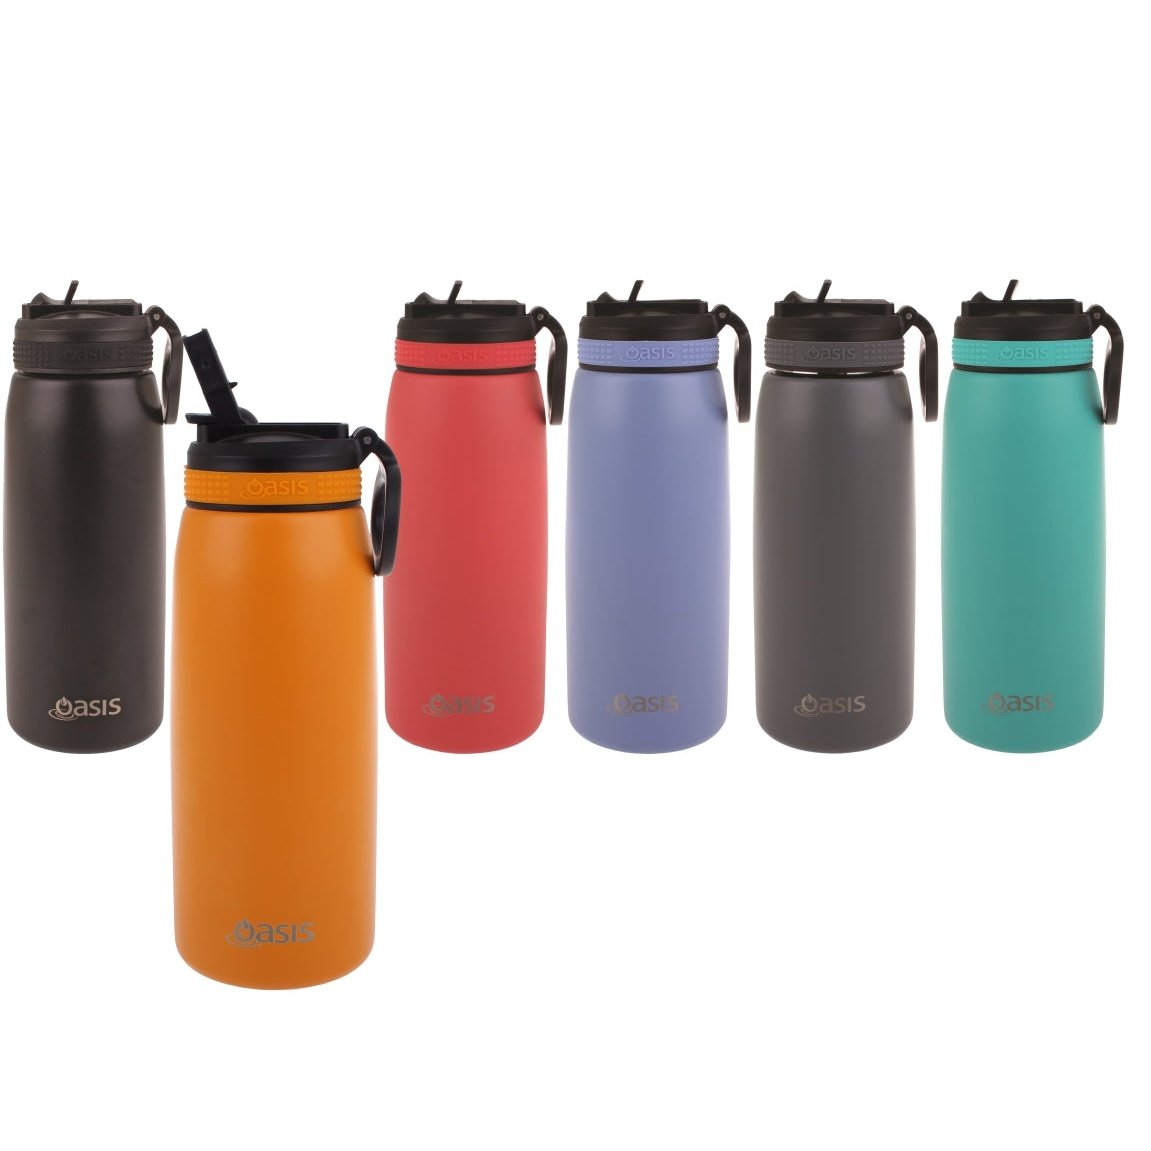 Oasis Double Wall Insulated Stainless Steel Water Bottle – Options